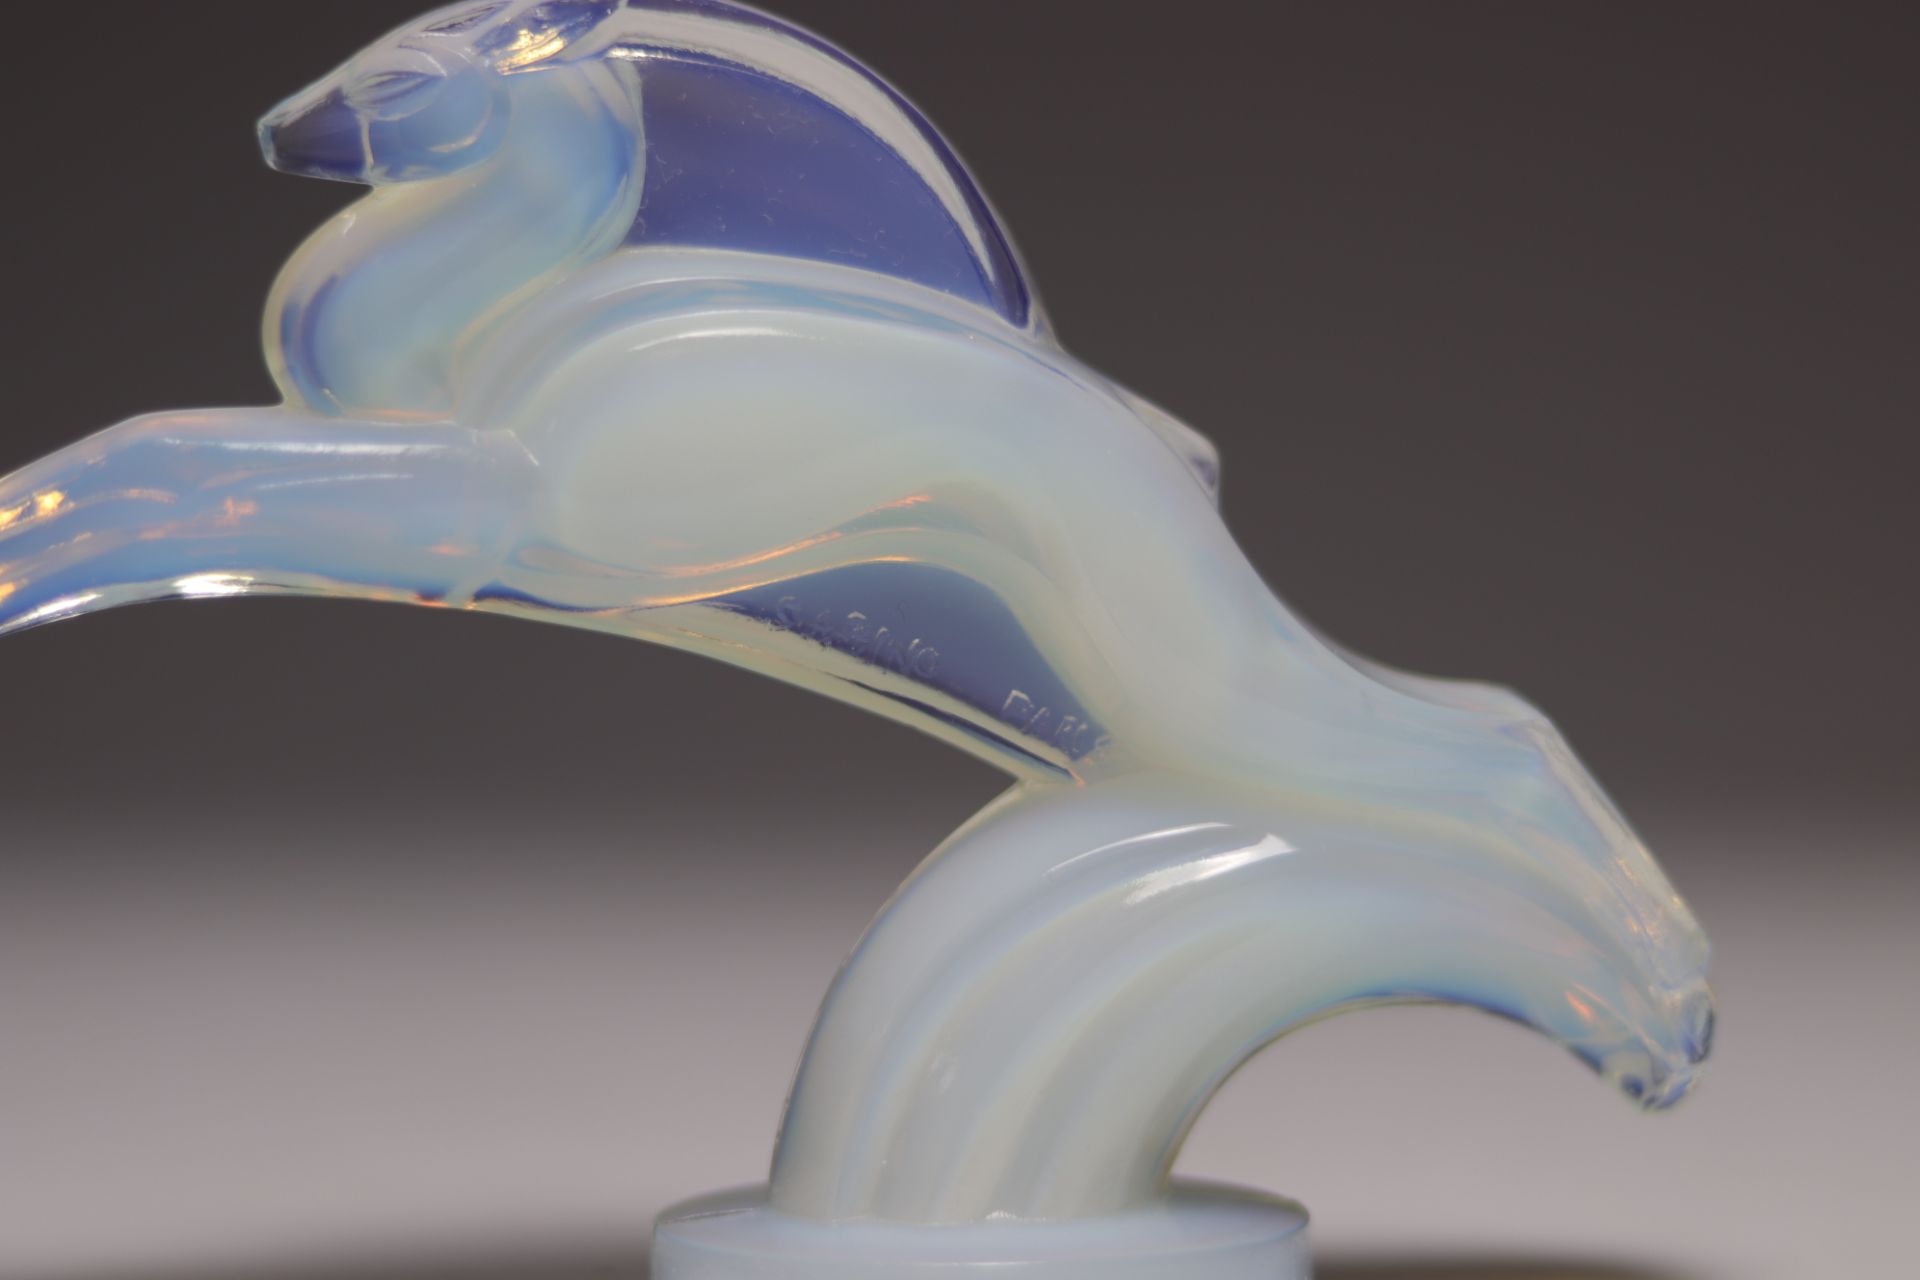 Sabino leaping gazelle in opalescent glass - Image 4 of 4